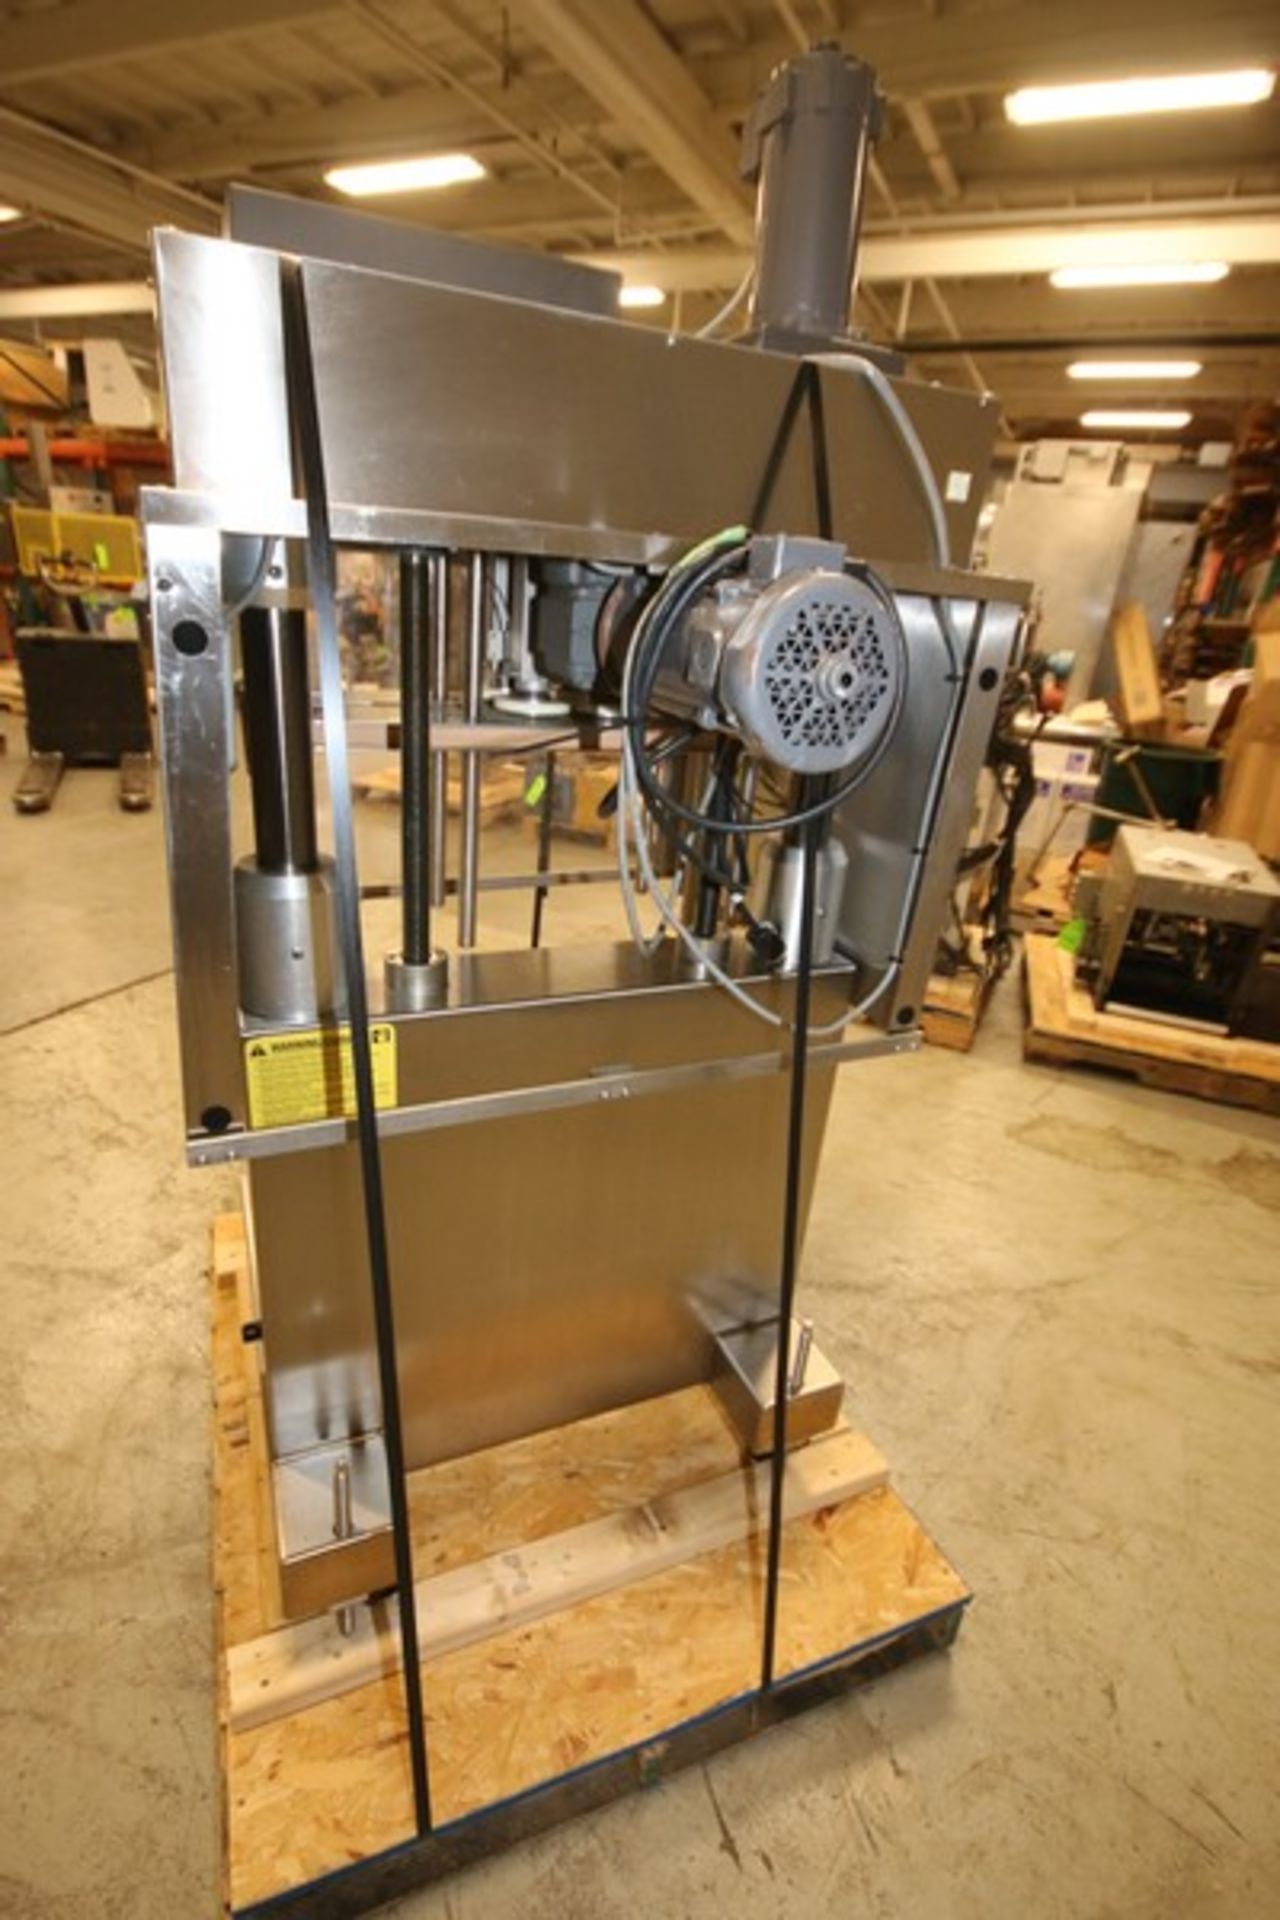 Kaps - All In Line S/S Capper, Model FE4-R, SN 4912, with 4 - Heads, Controls, 110V (INV#101589) ( - Image 7 of 10